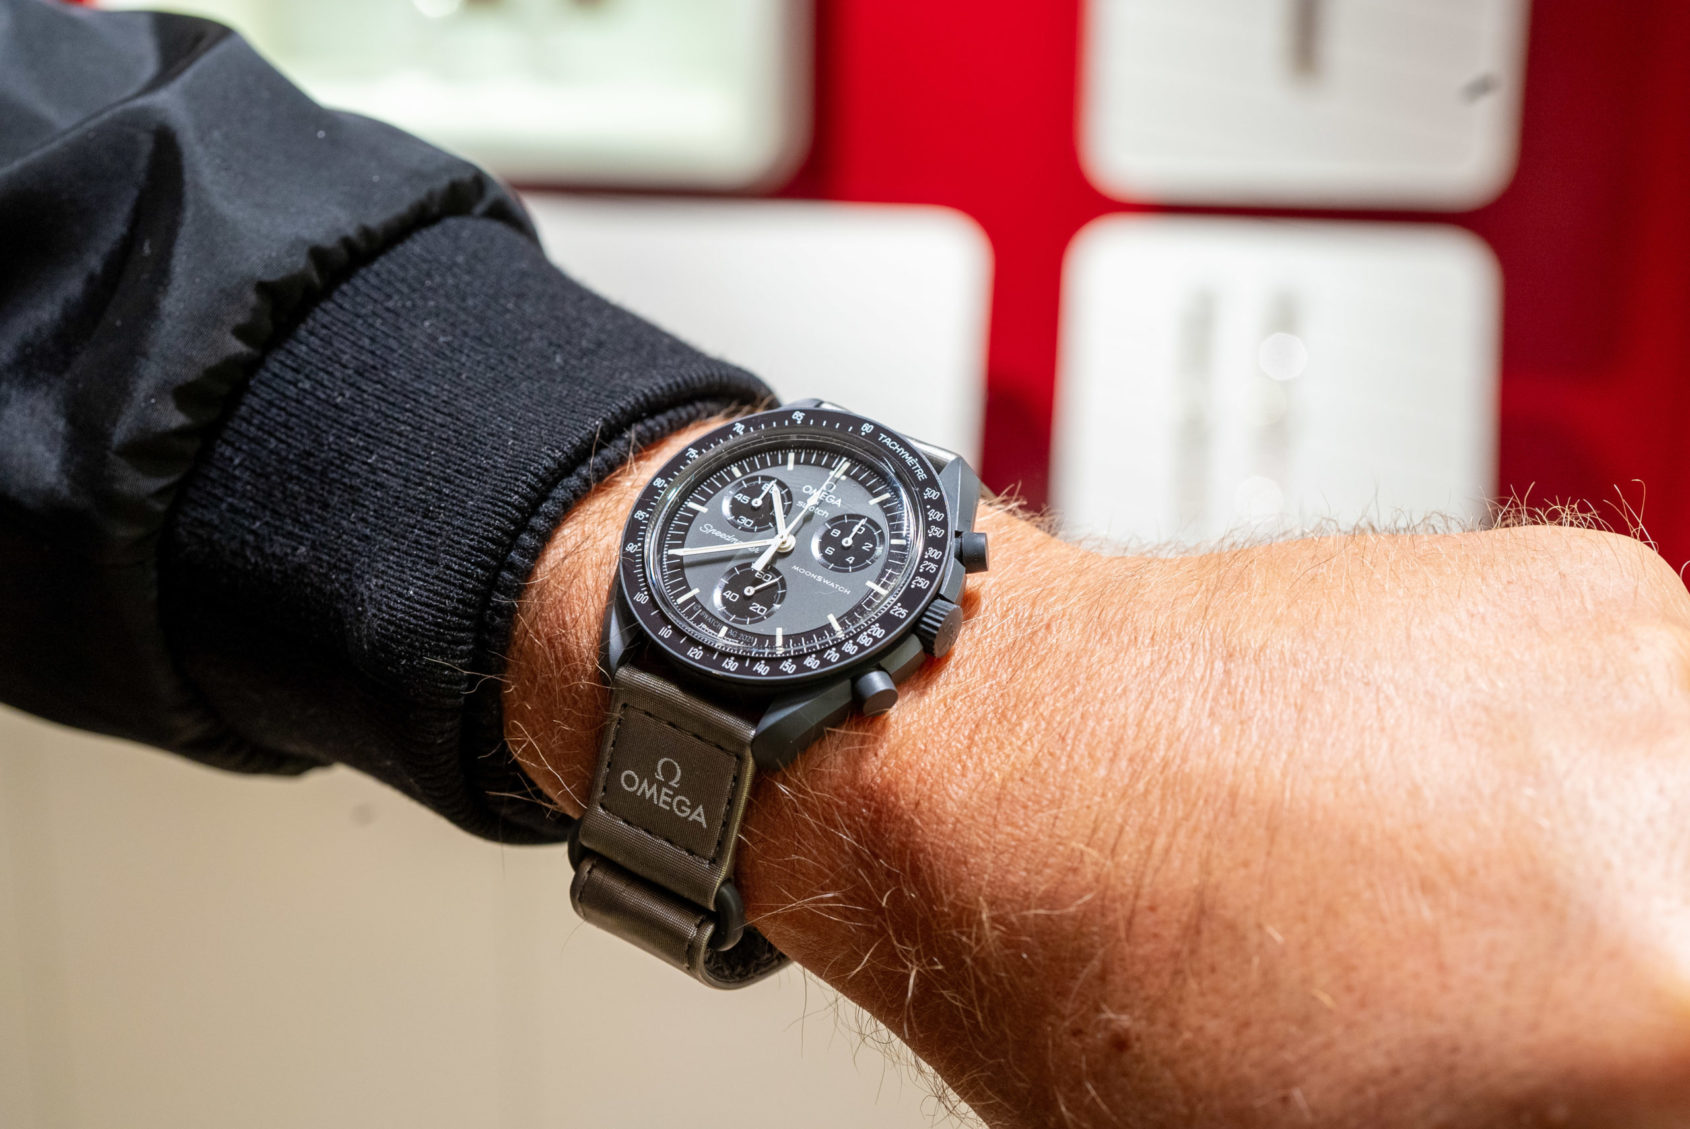 Video: Hands-on with all 11 missions of the Swatch x Omega MoonSwatch